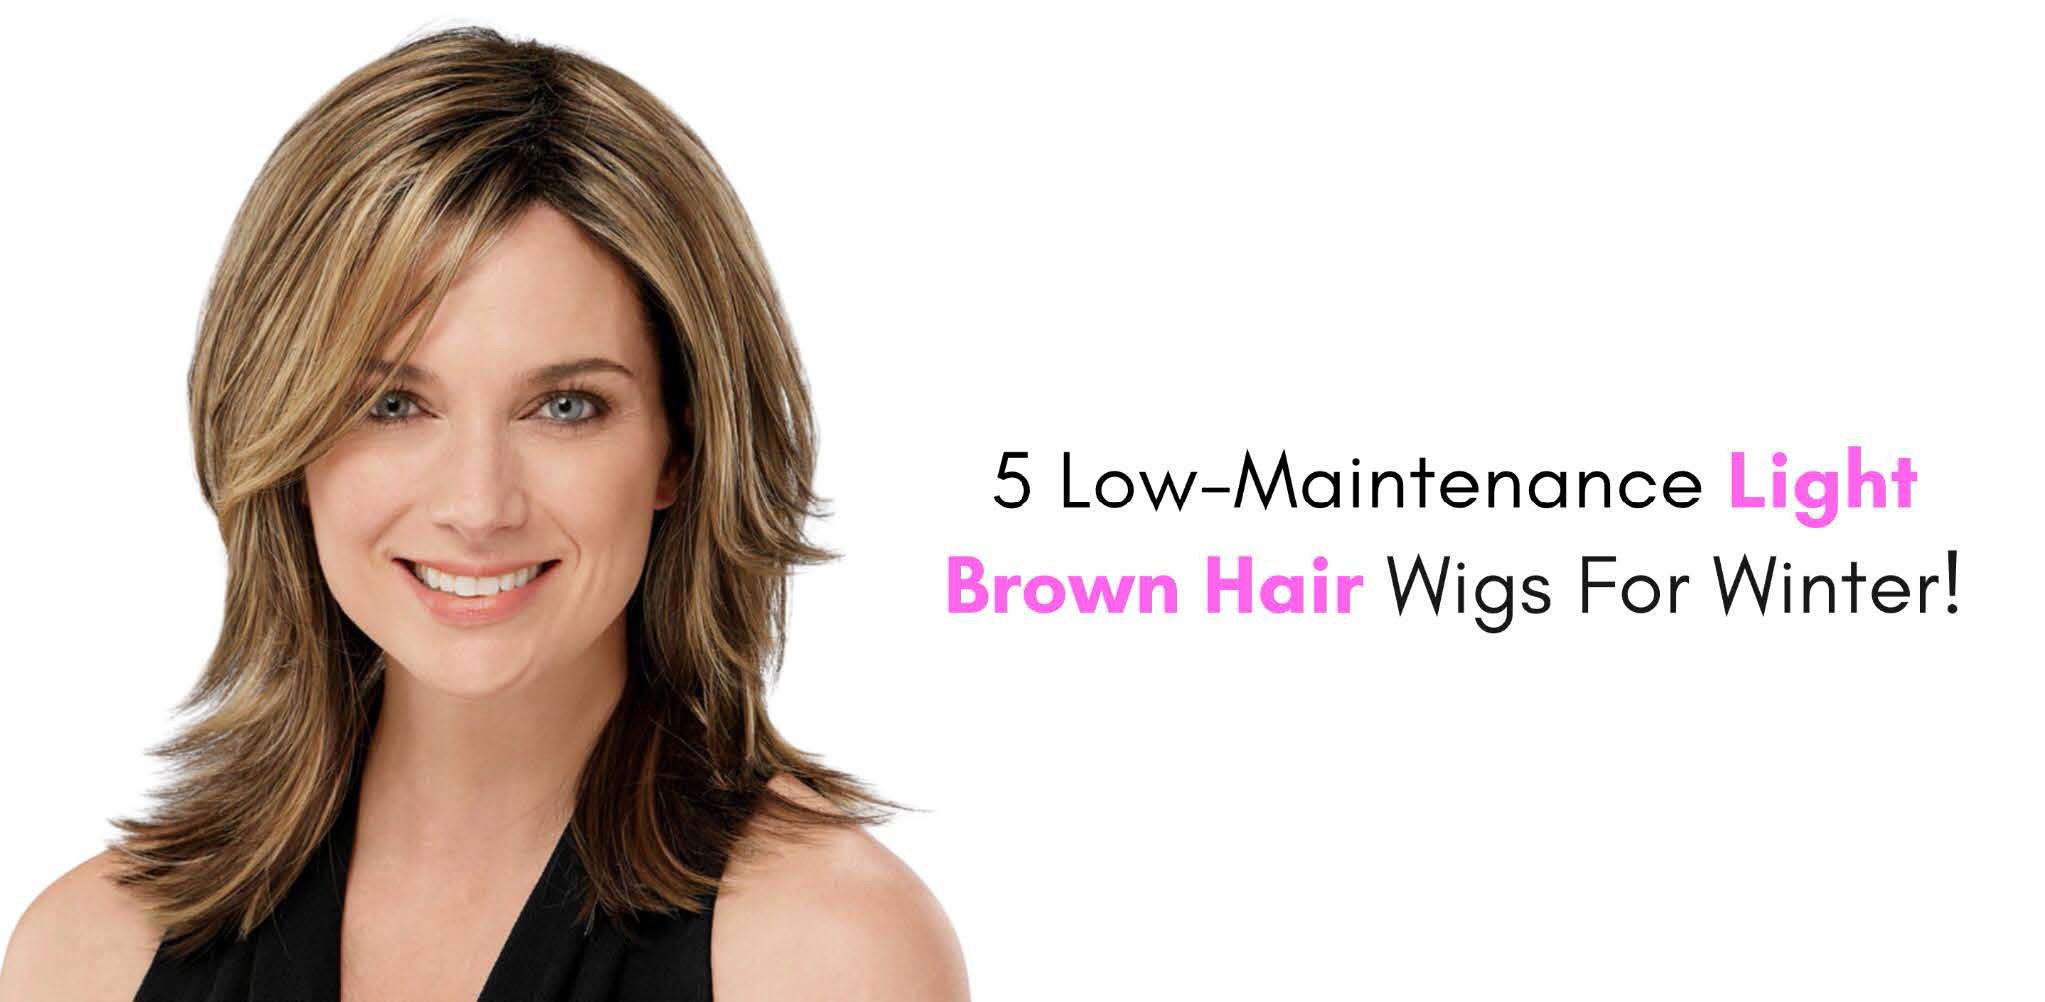 5 Low-Maintenance Light Brown Hair Wigs For Winter!